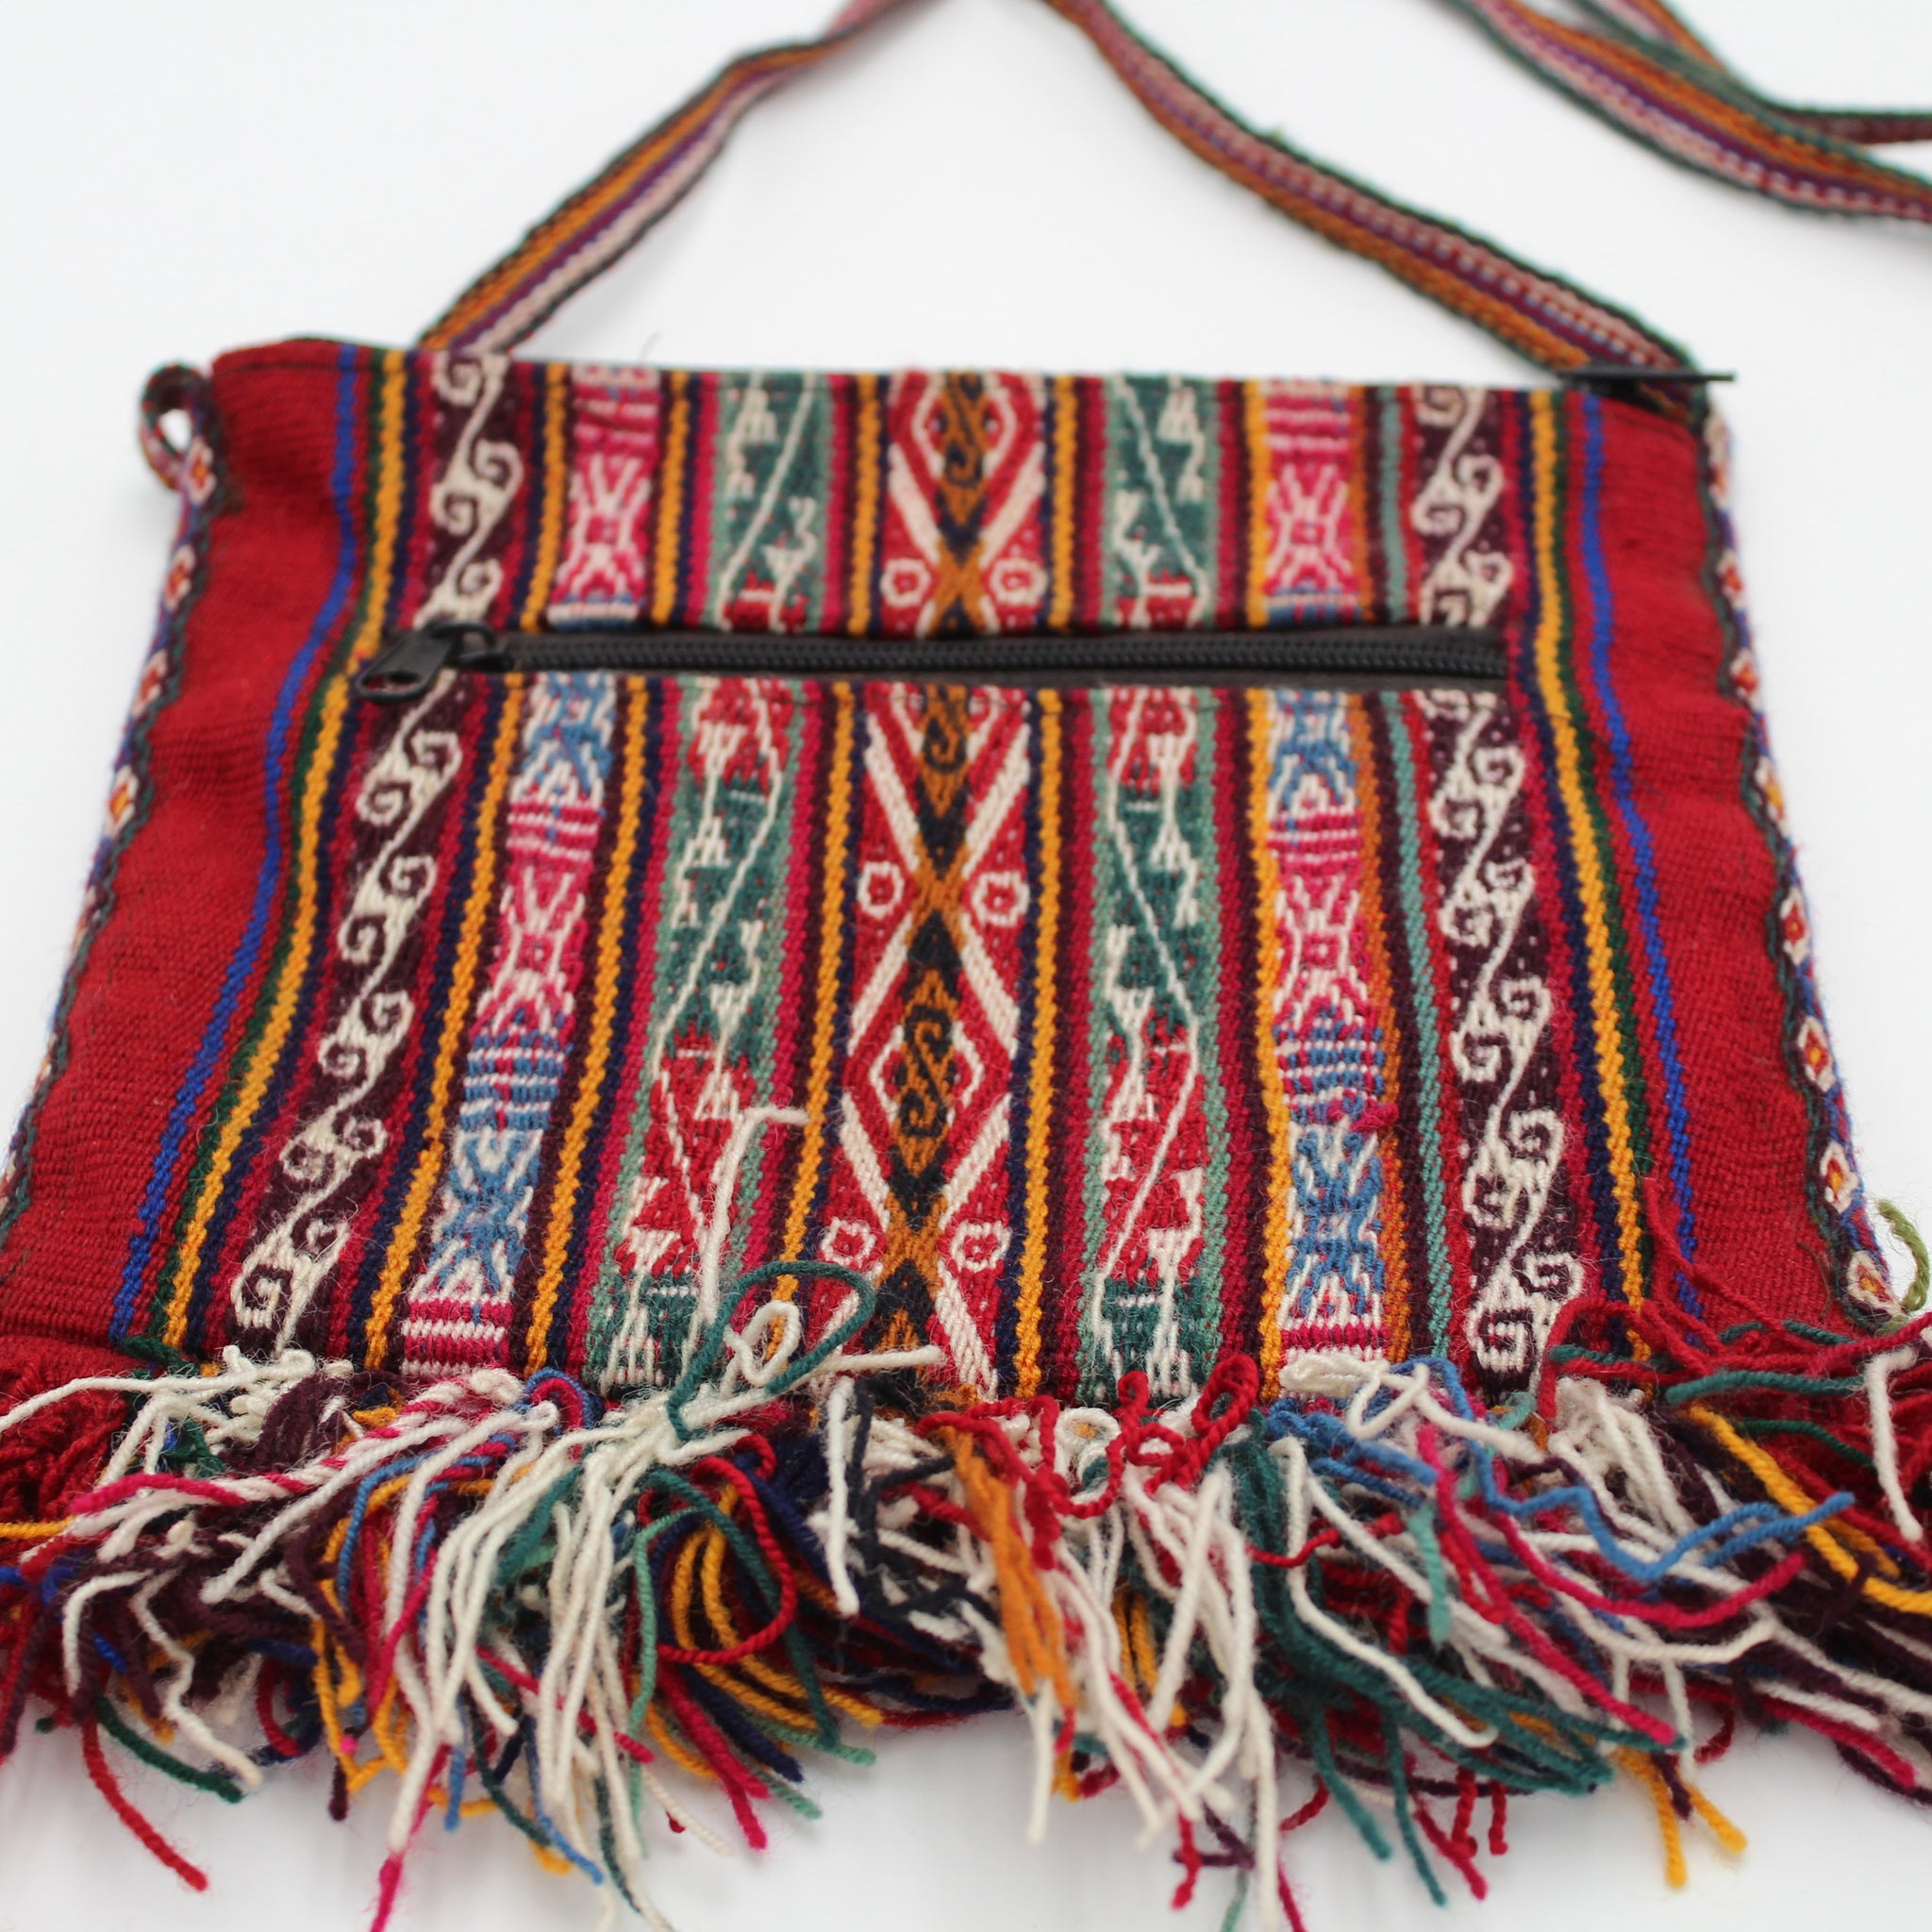 Small Chuspa Crossbody - Red with Multicolor patterns and fringe